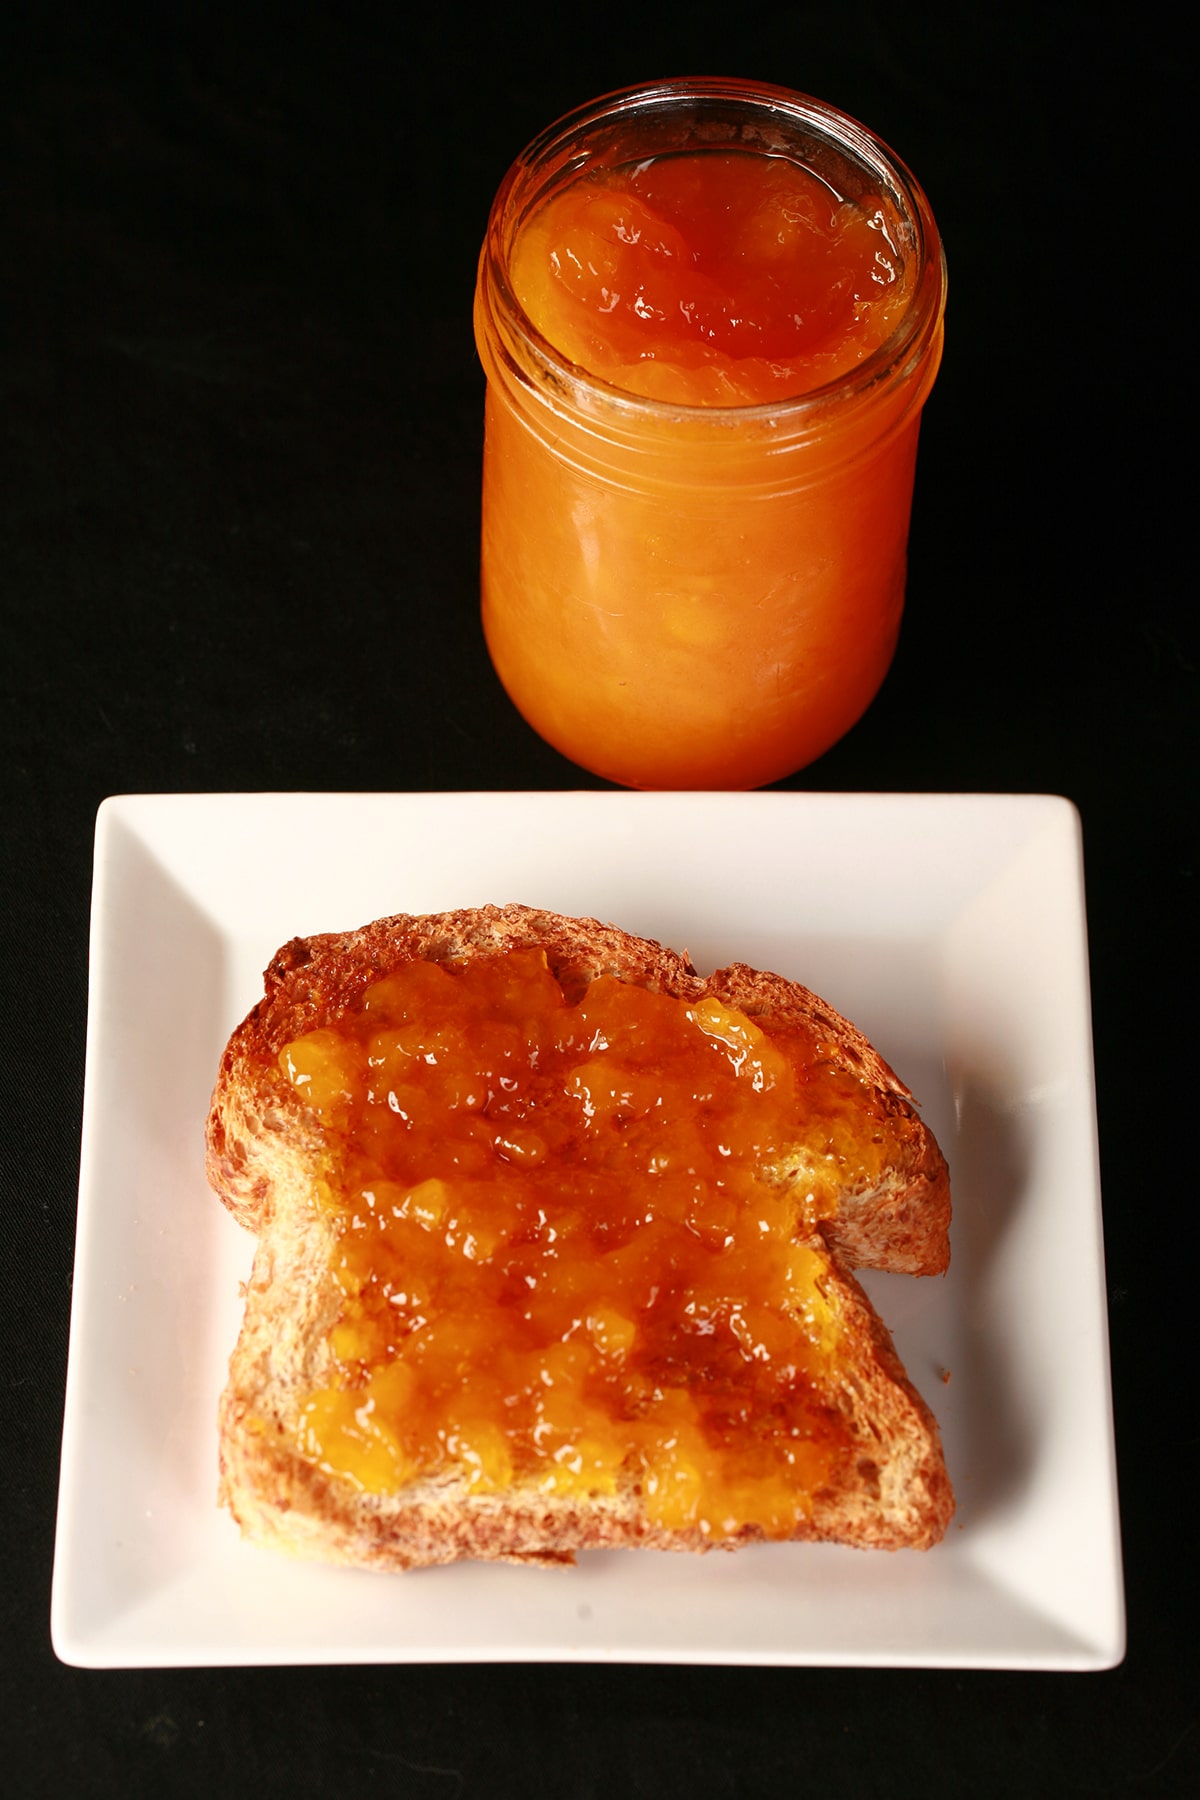 An open jar of mango peach jam next to a slice of toast on a plate. The toast is generously spread with the jam.